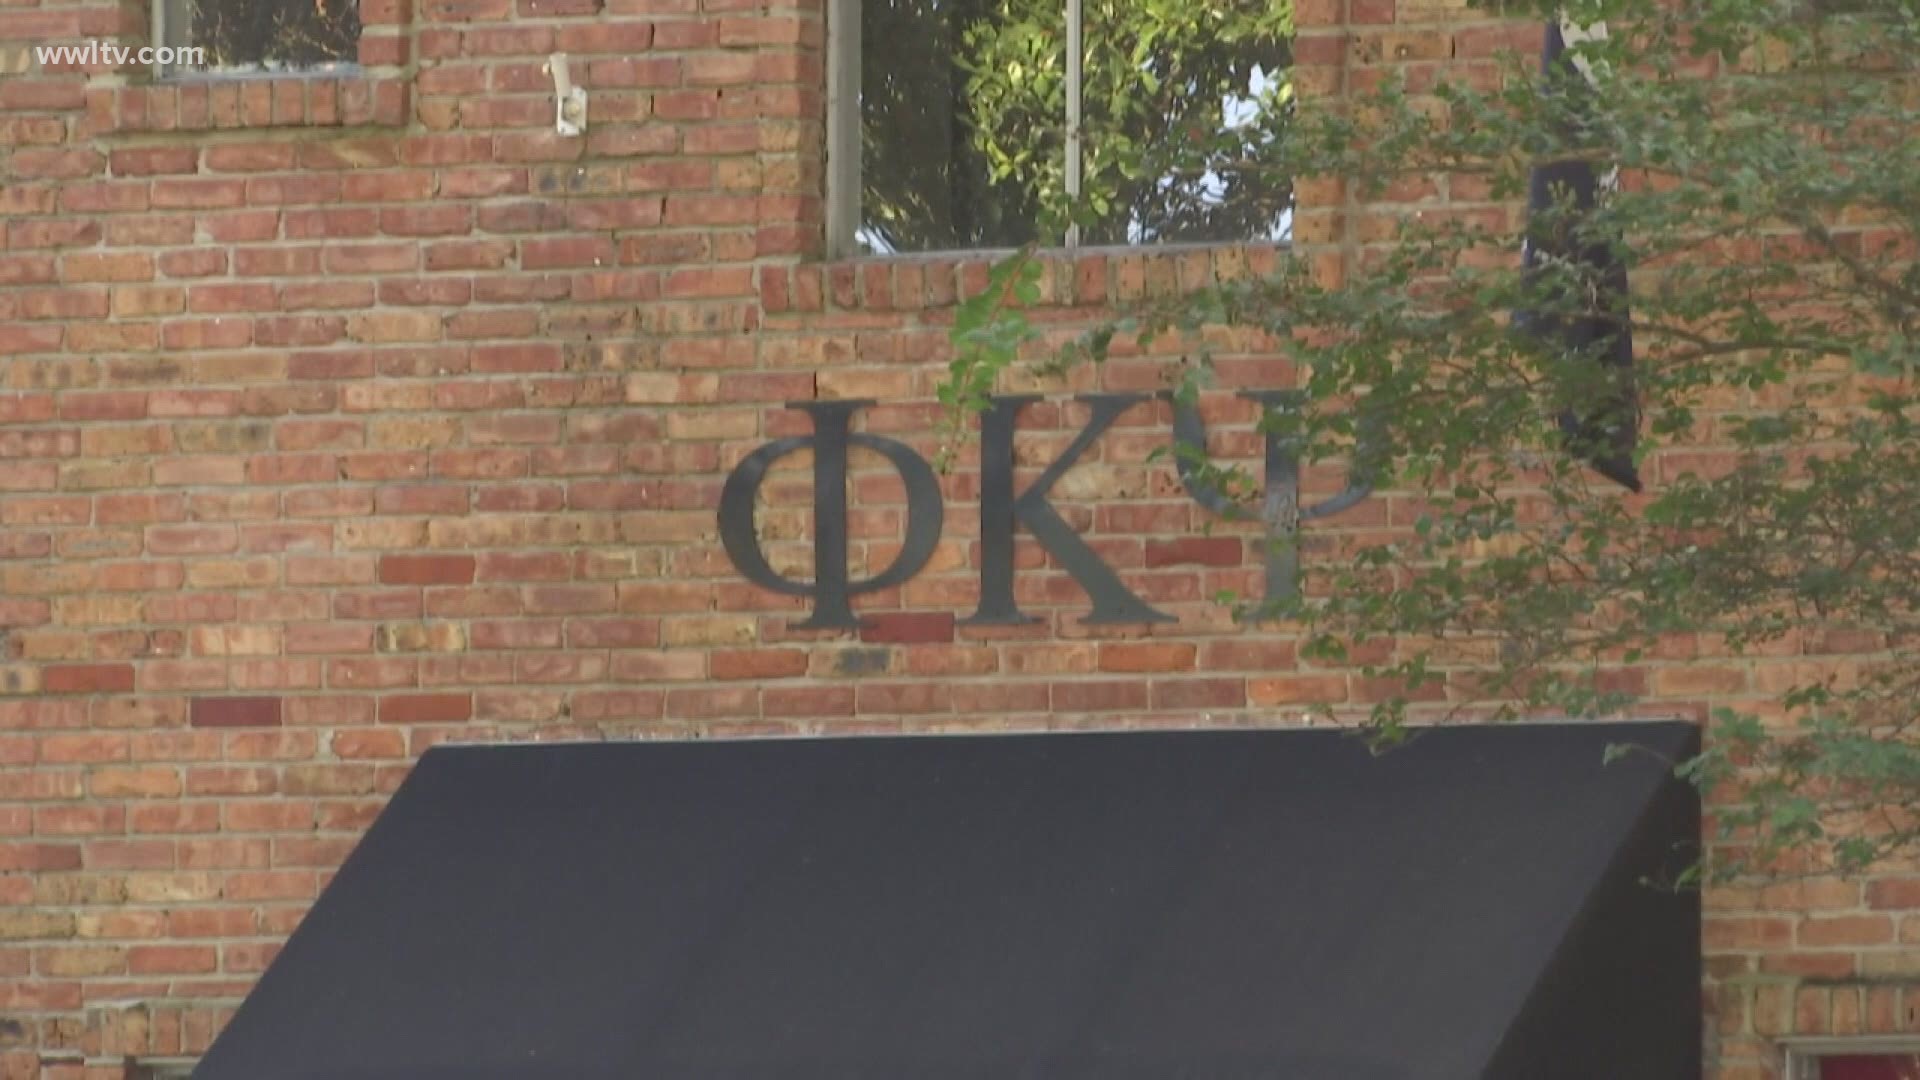 An investigation has begun for hazing at LSU that left a student from New Orleans hospitalized. Another student died by suicide the same night.